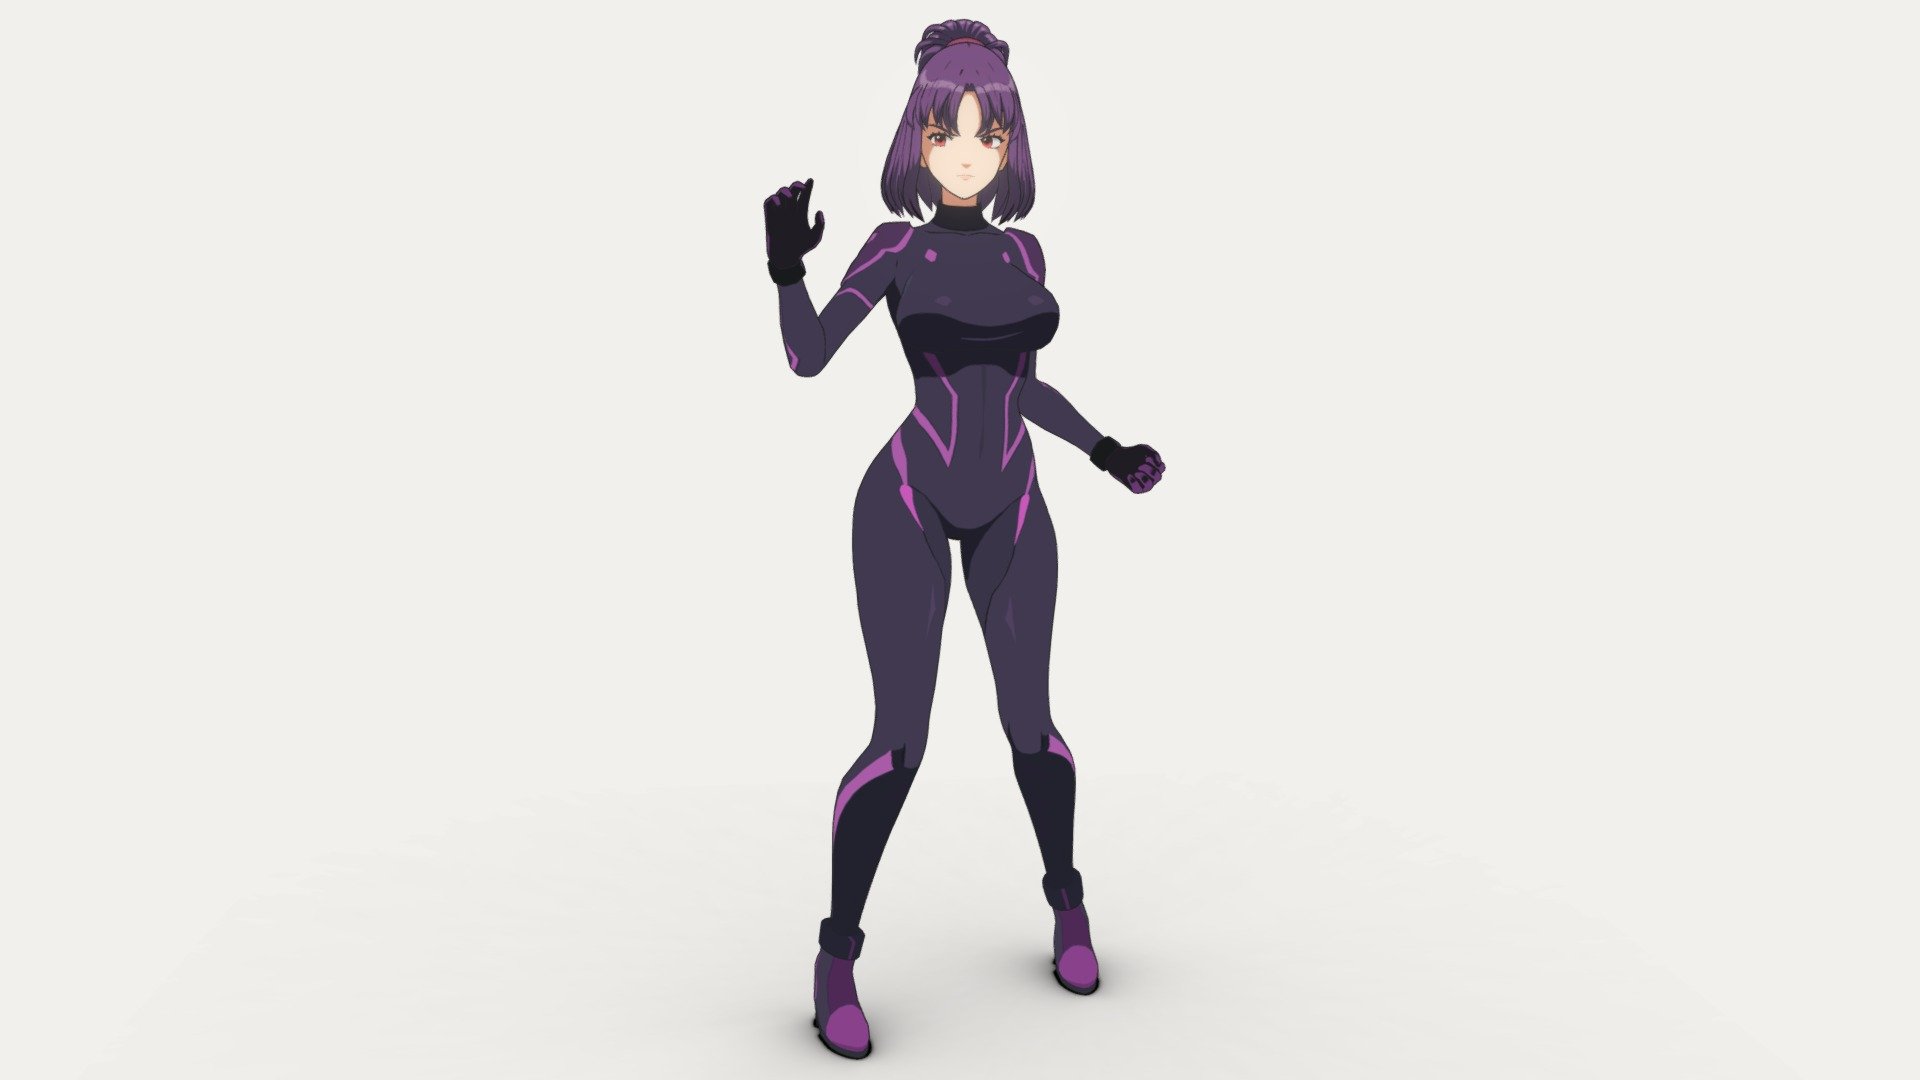 A 3D anime model, with colors and features reminiscent of the 80s.

Original Design by Kevin Rivera for an upcoming RPG.

For commissions, Discord: thiagolessa - Violet Nox - 3D model by LessaB3D 3d model